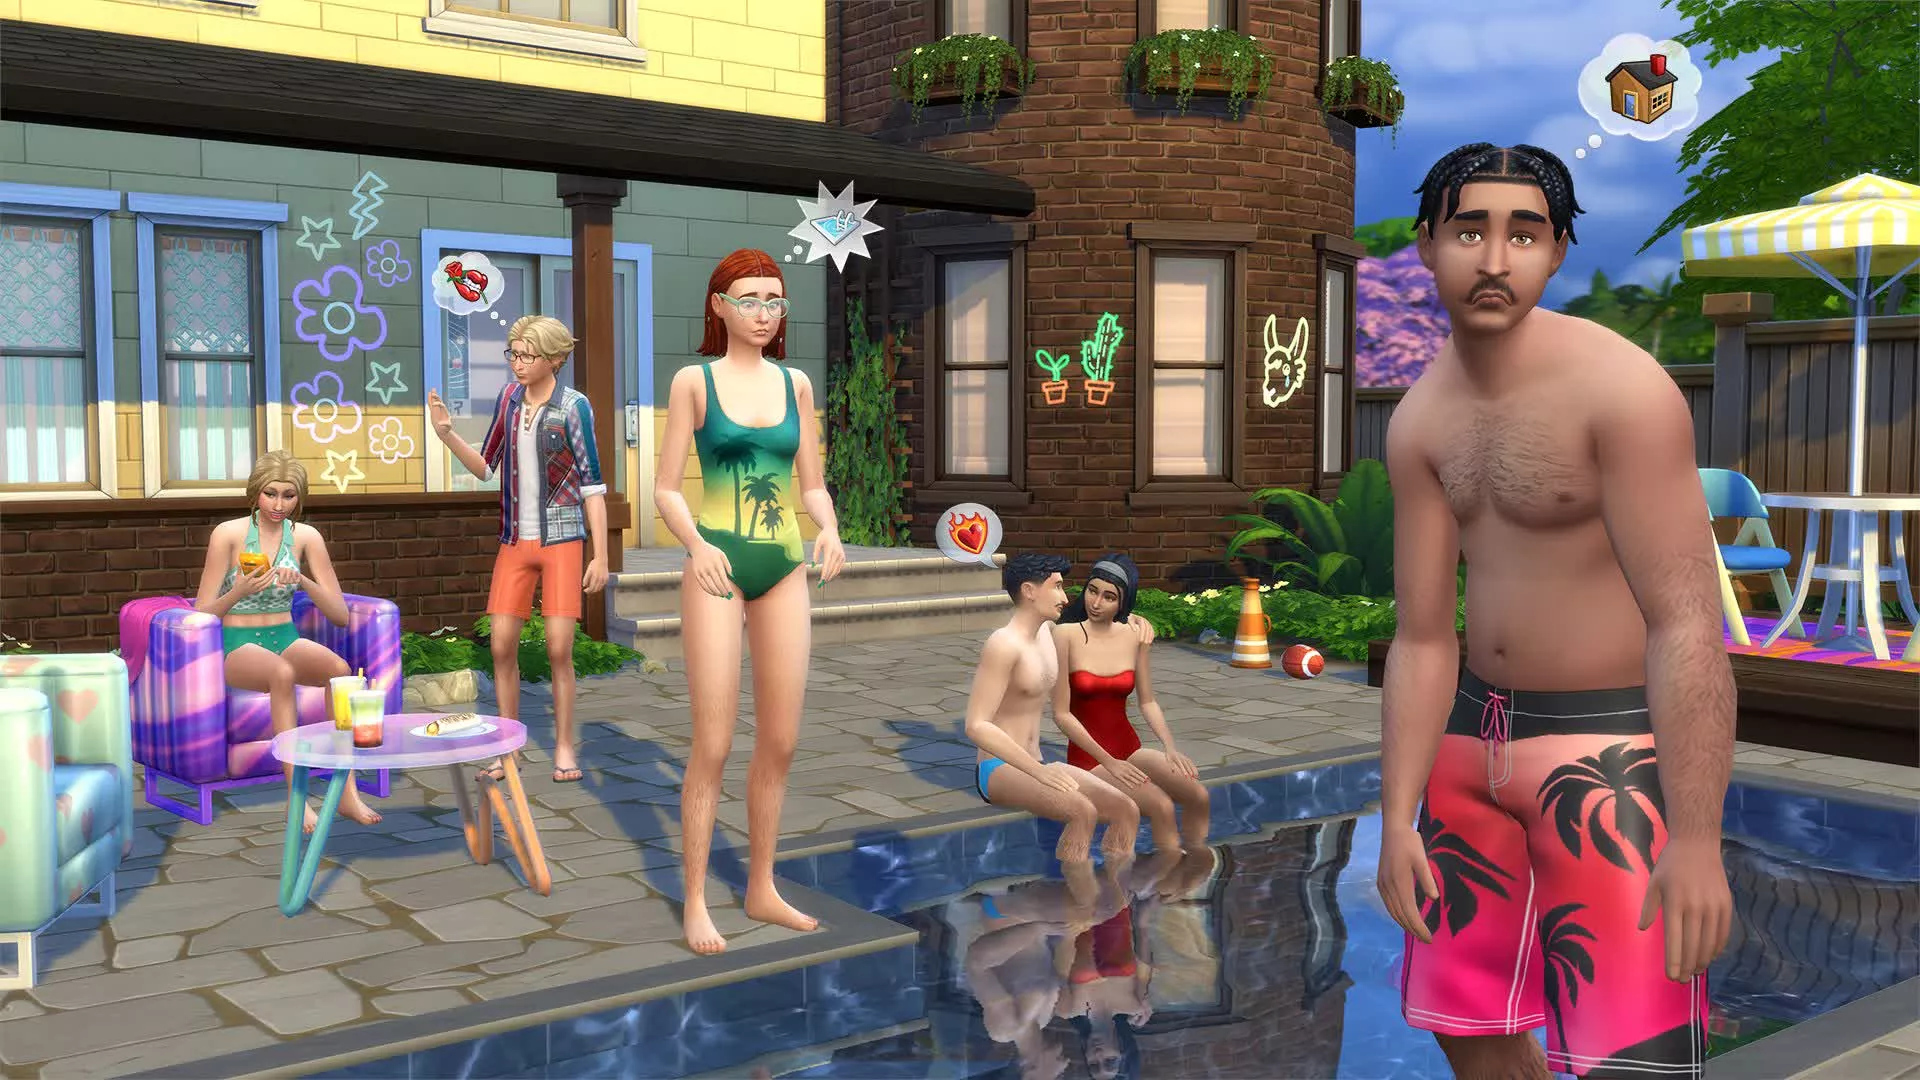 The next Sims game won't be called Sims 5, but it will be free to play